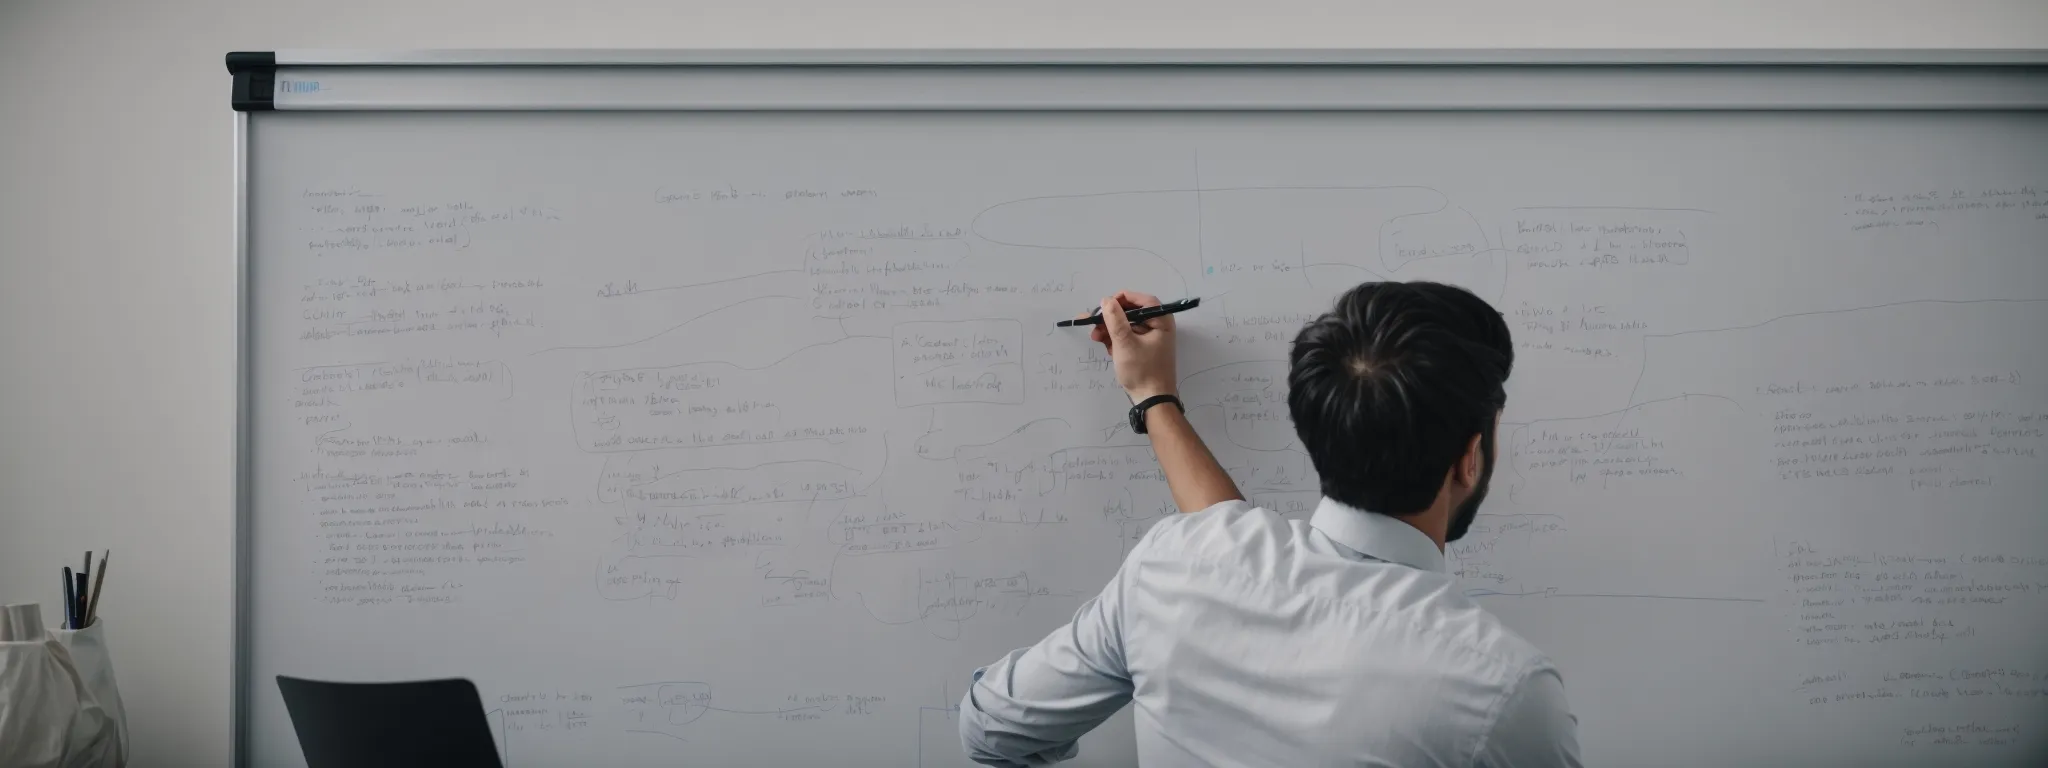 a content strategist is brainstorming the structure of a headless cms interface on a whiteboard.